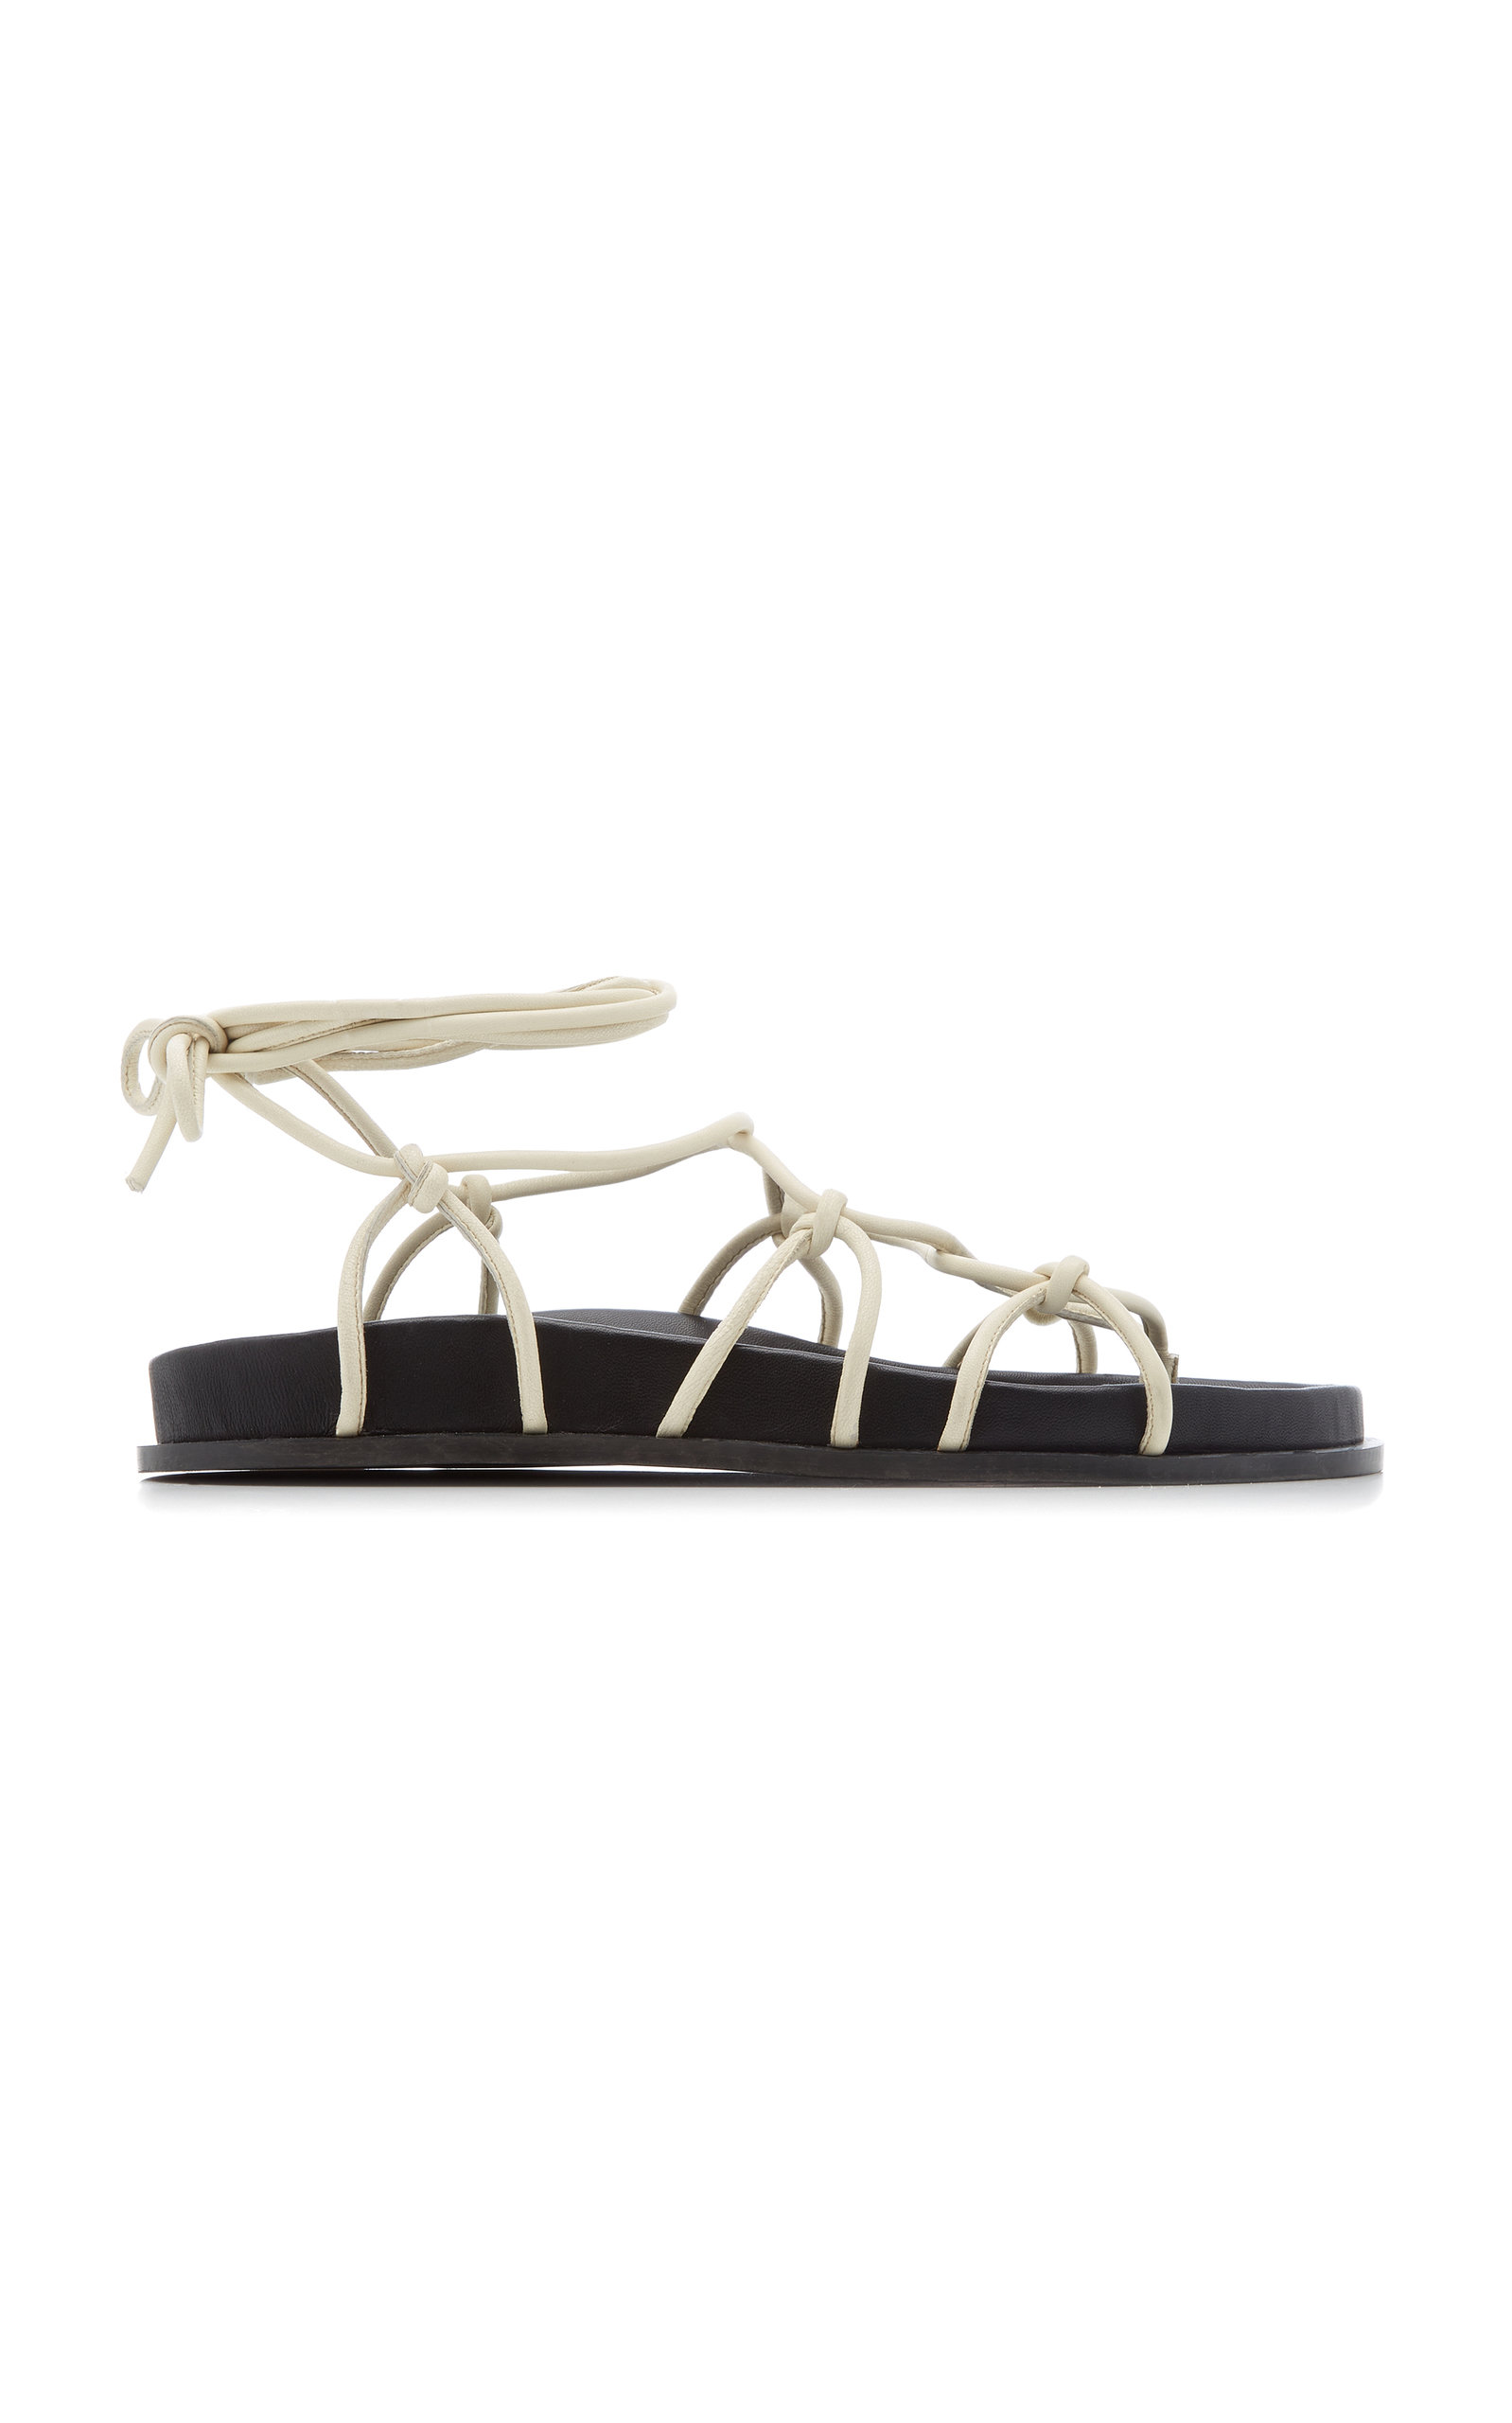 A.Emery Women's Tuli Leather Sandals